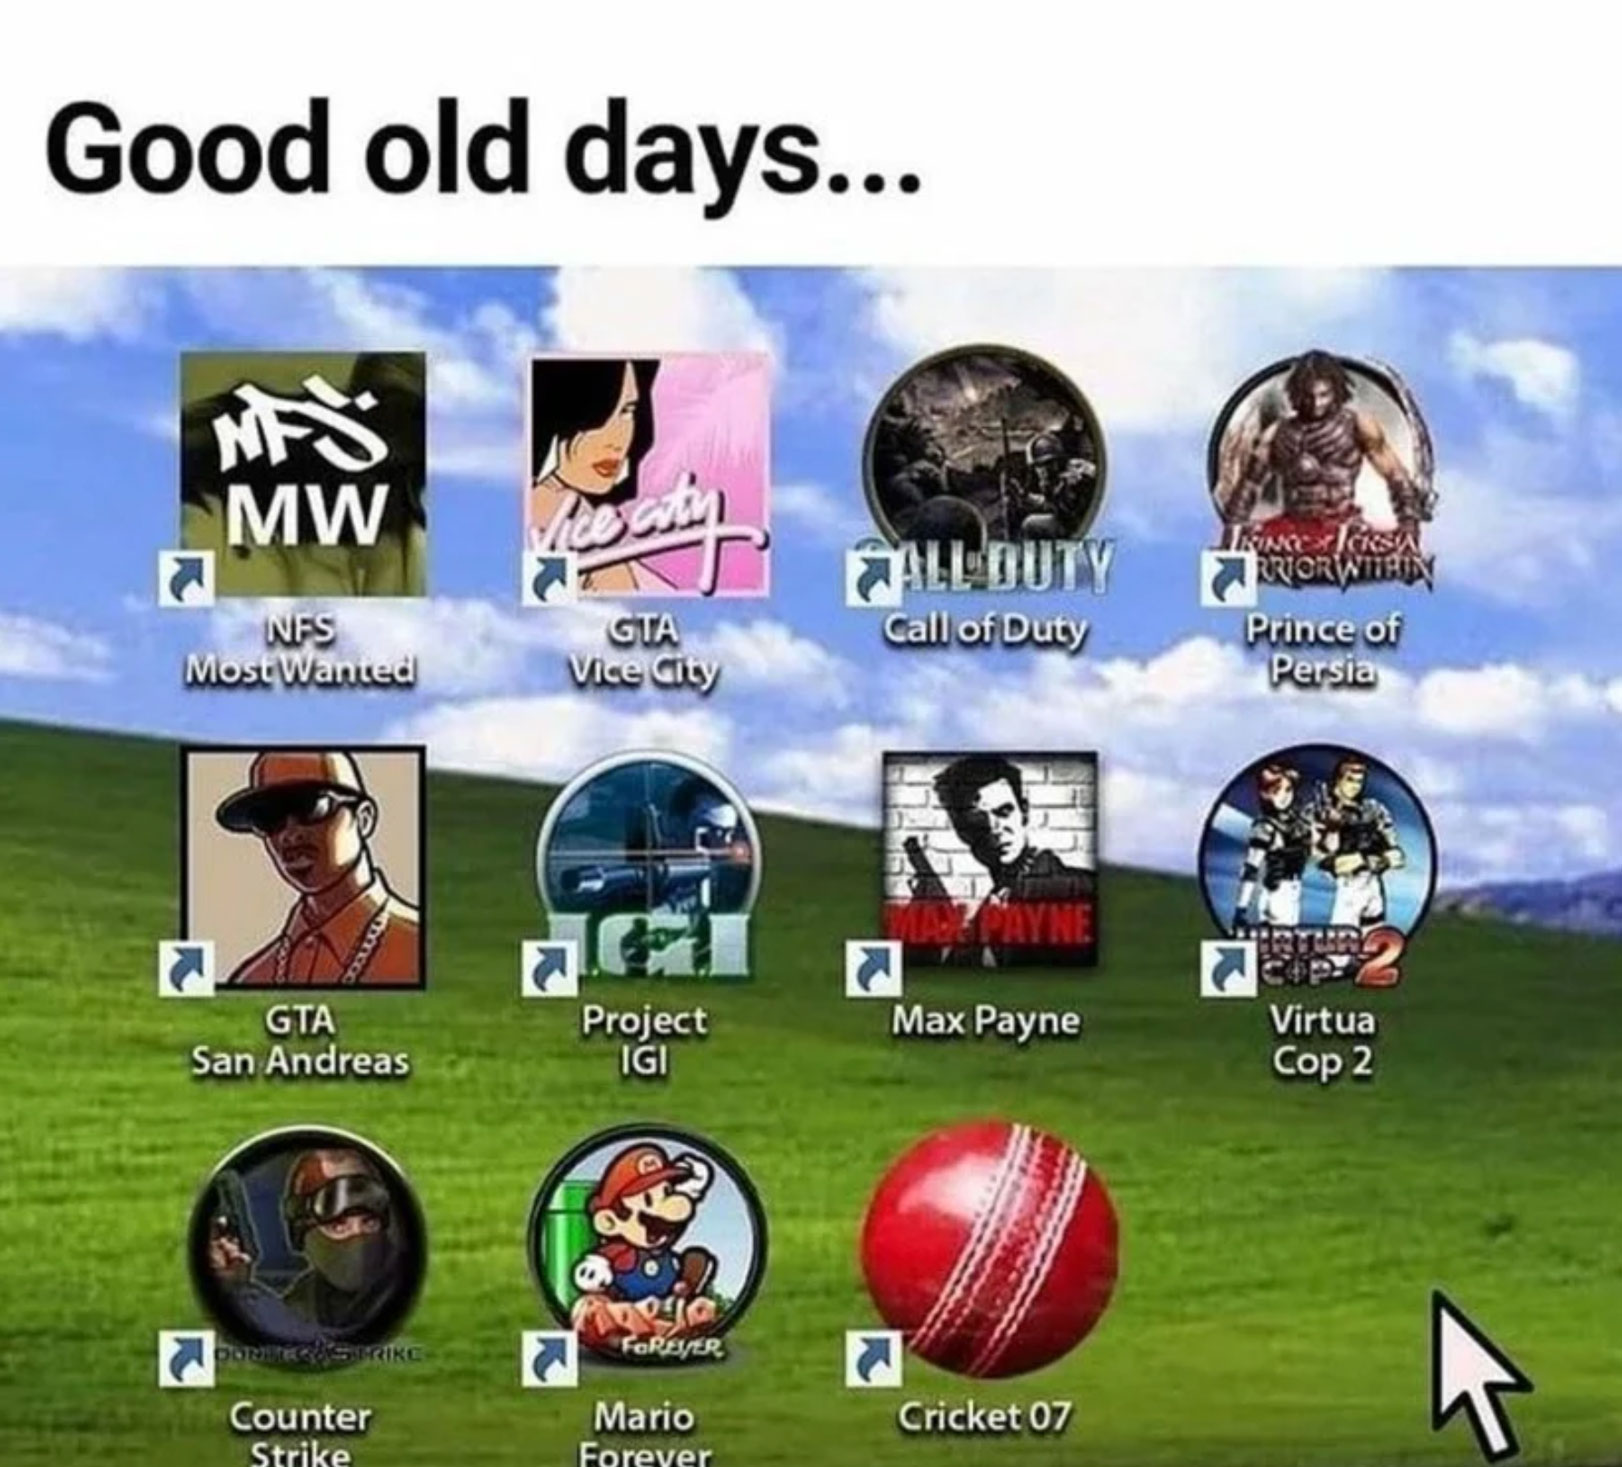 funny gaming memes  - nfsmw - Good old days... Nes Mw lice Baty Call Duty Call of Duty Dinleksa Irror Within Prince of Persia Nes Most Wanted Gta Vice City Assist Gta San Andreas Max Payne Project Igi Virtua Cop 2 fuego Forever roads Ikc Counter Strike x 